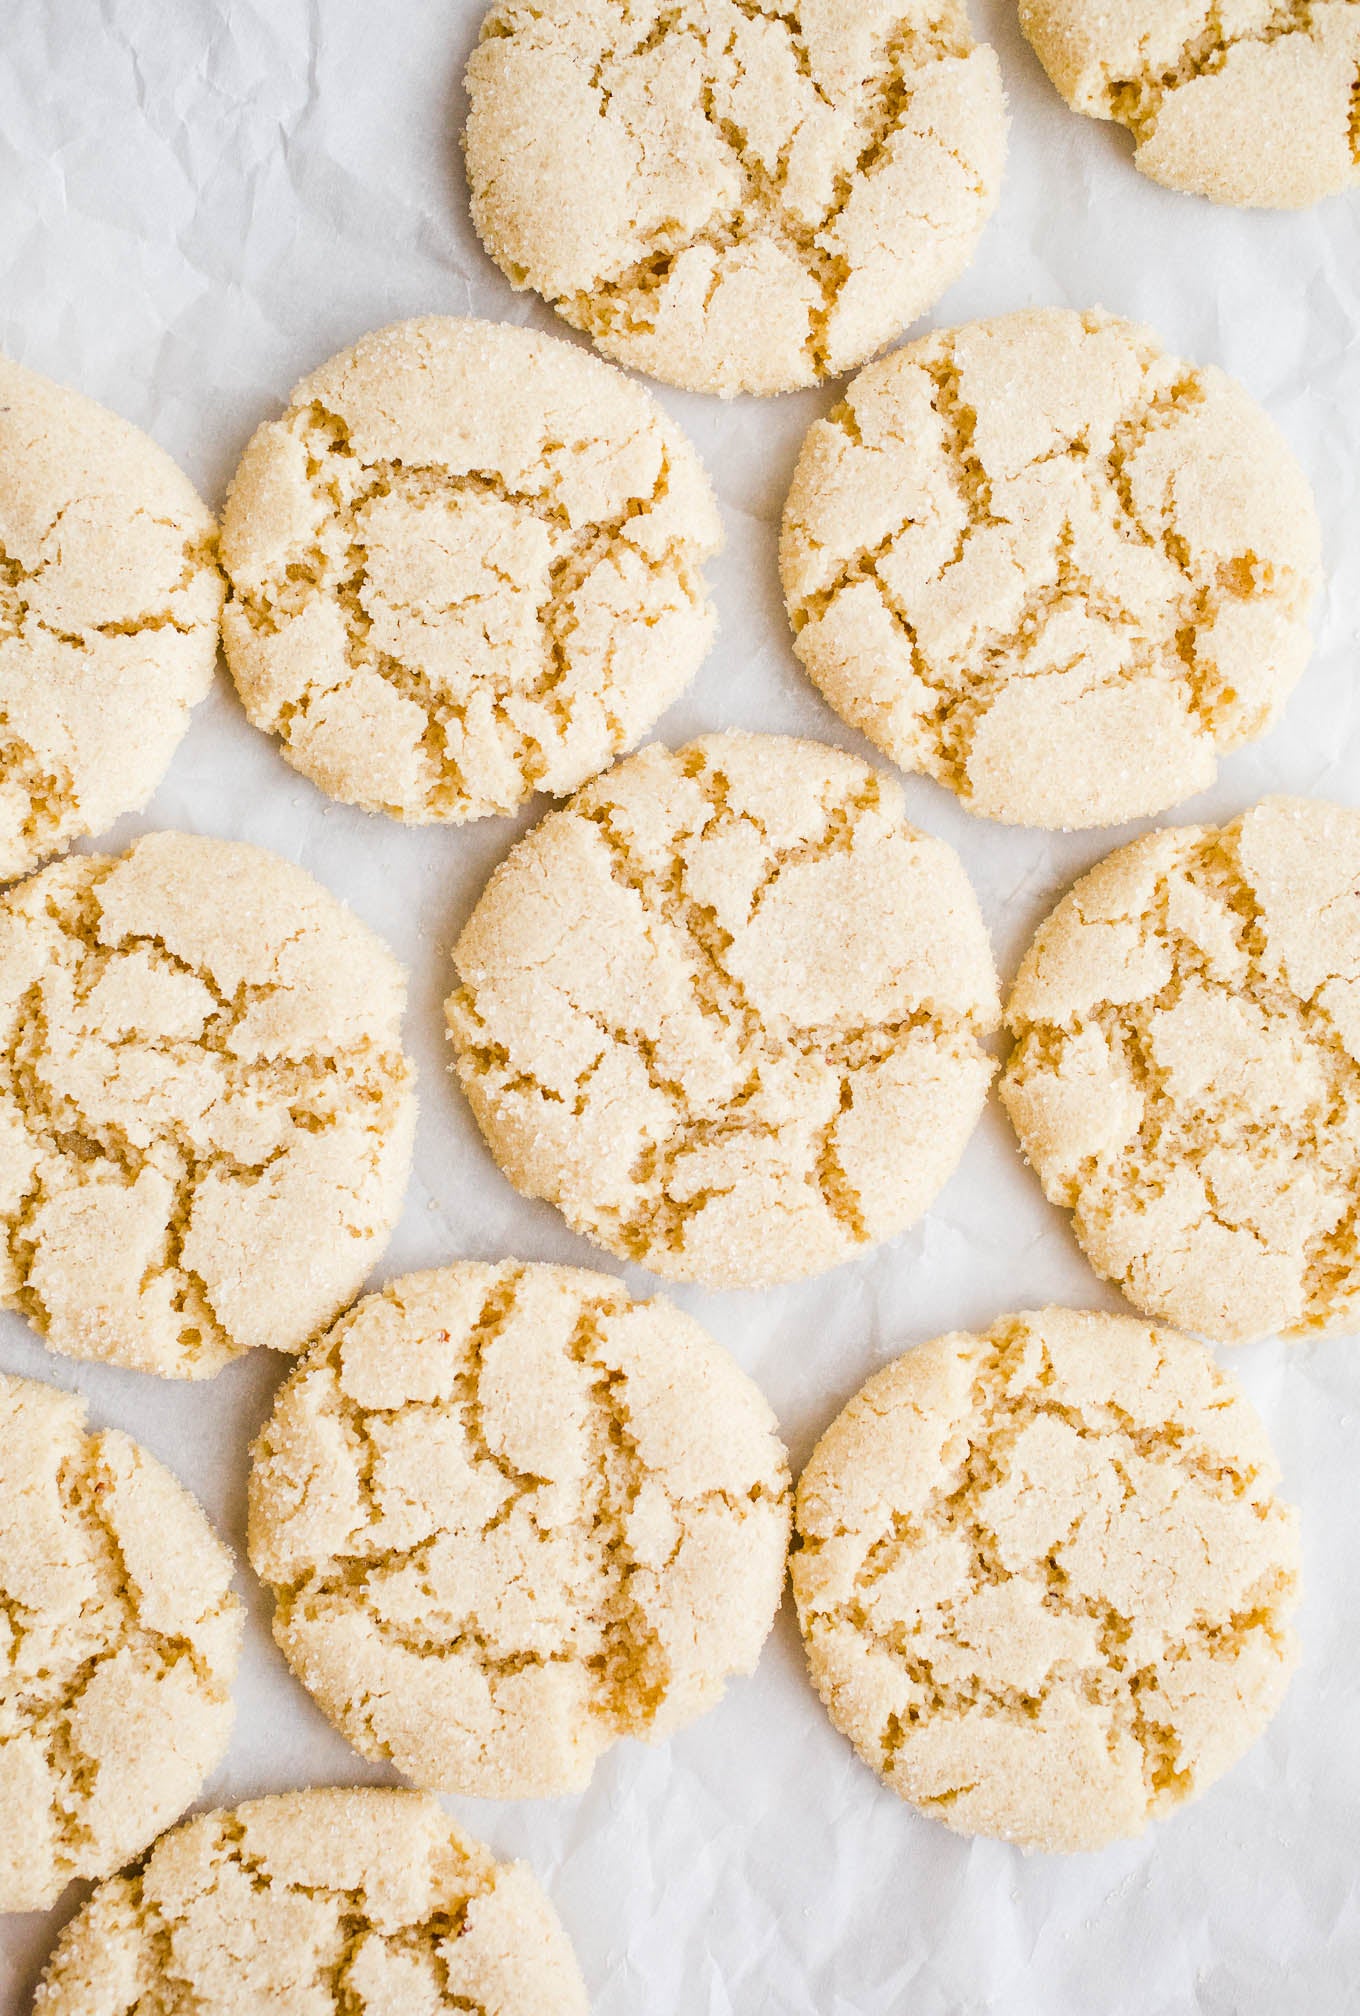 These Gluten-Free Almond Cookies are soft and chewy! Made with almond flour and sweetened with maple syrup and organic cane sugar, these easy almond cookies are also vegan. 